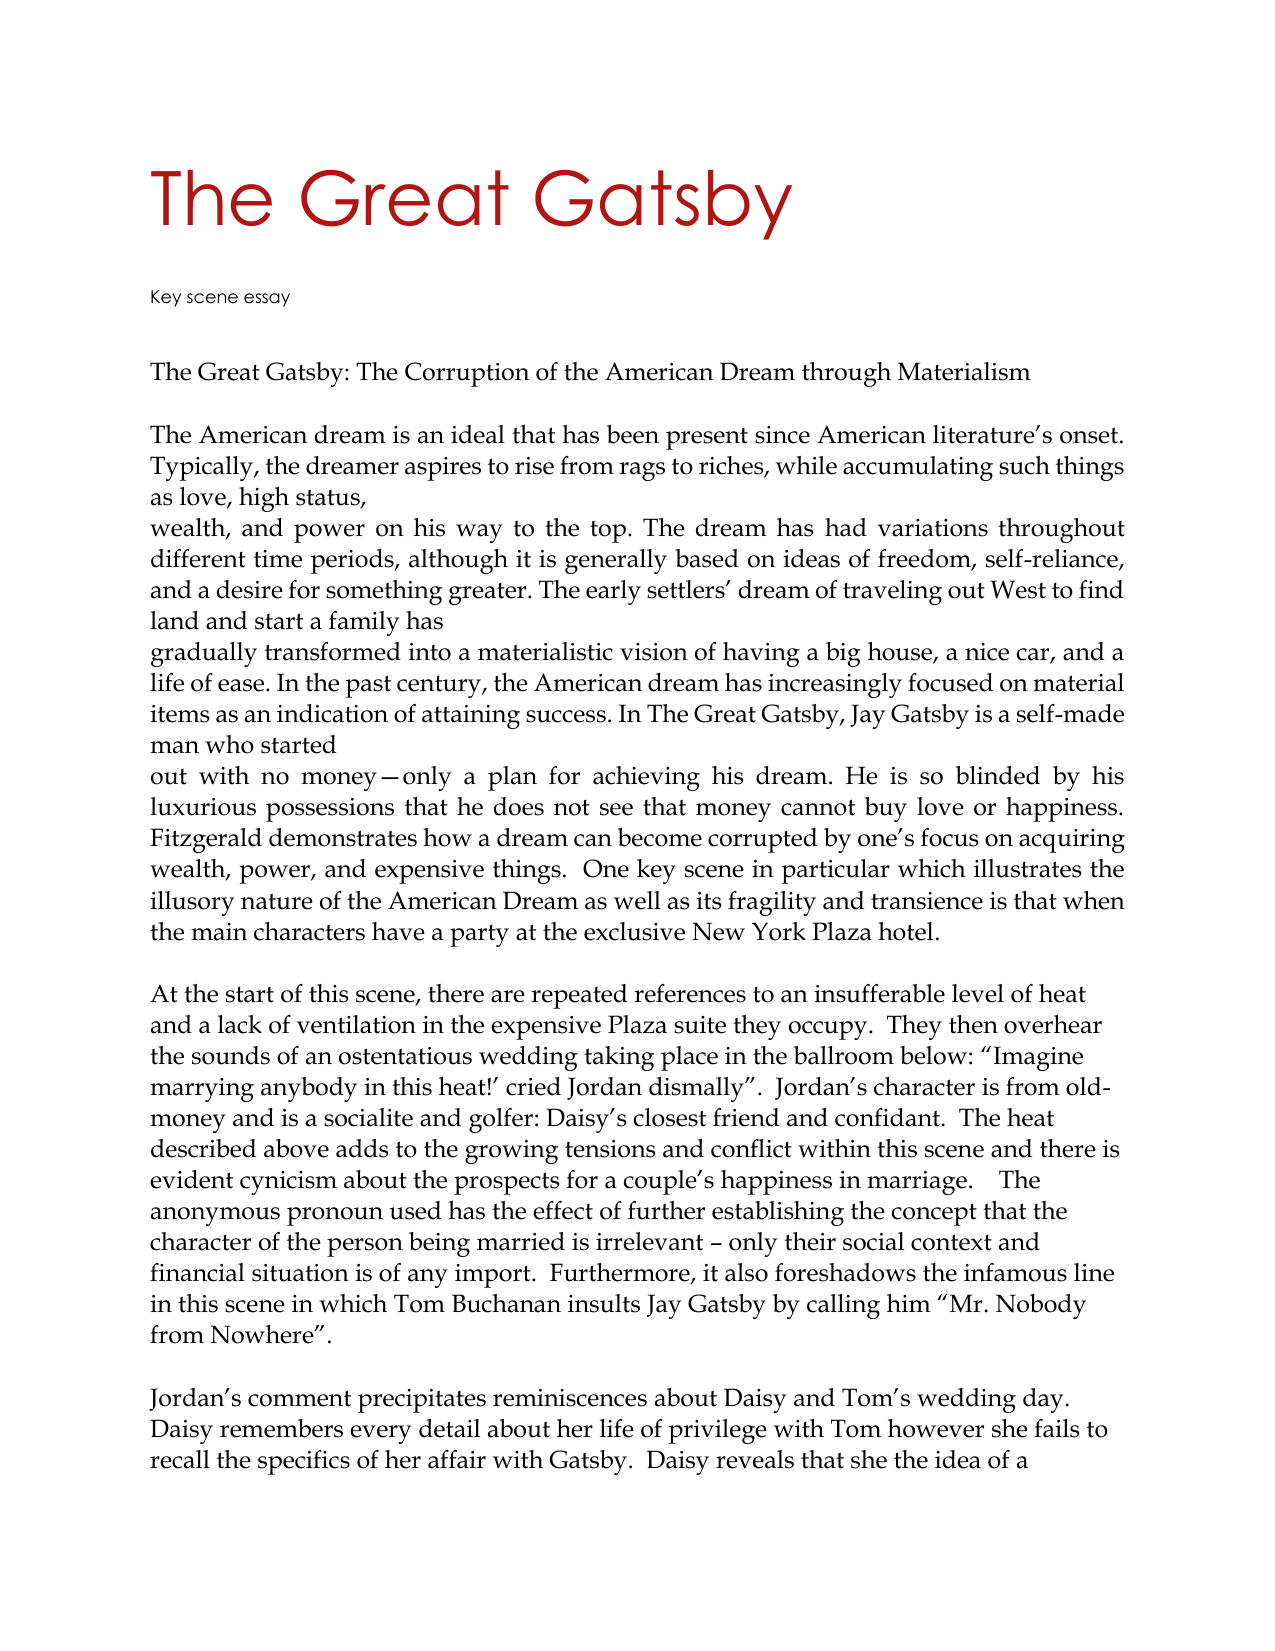 Gatsby Is Not Great Essay